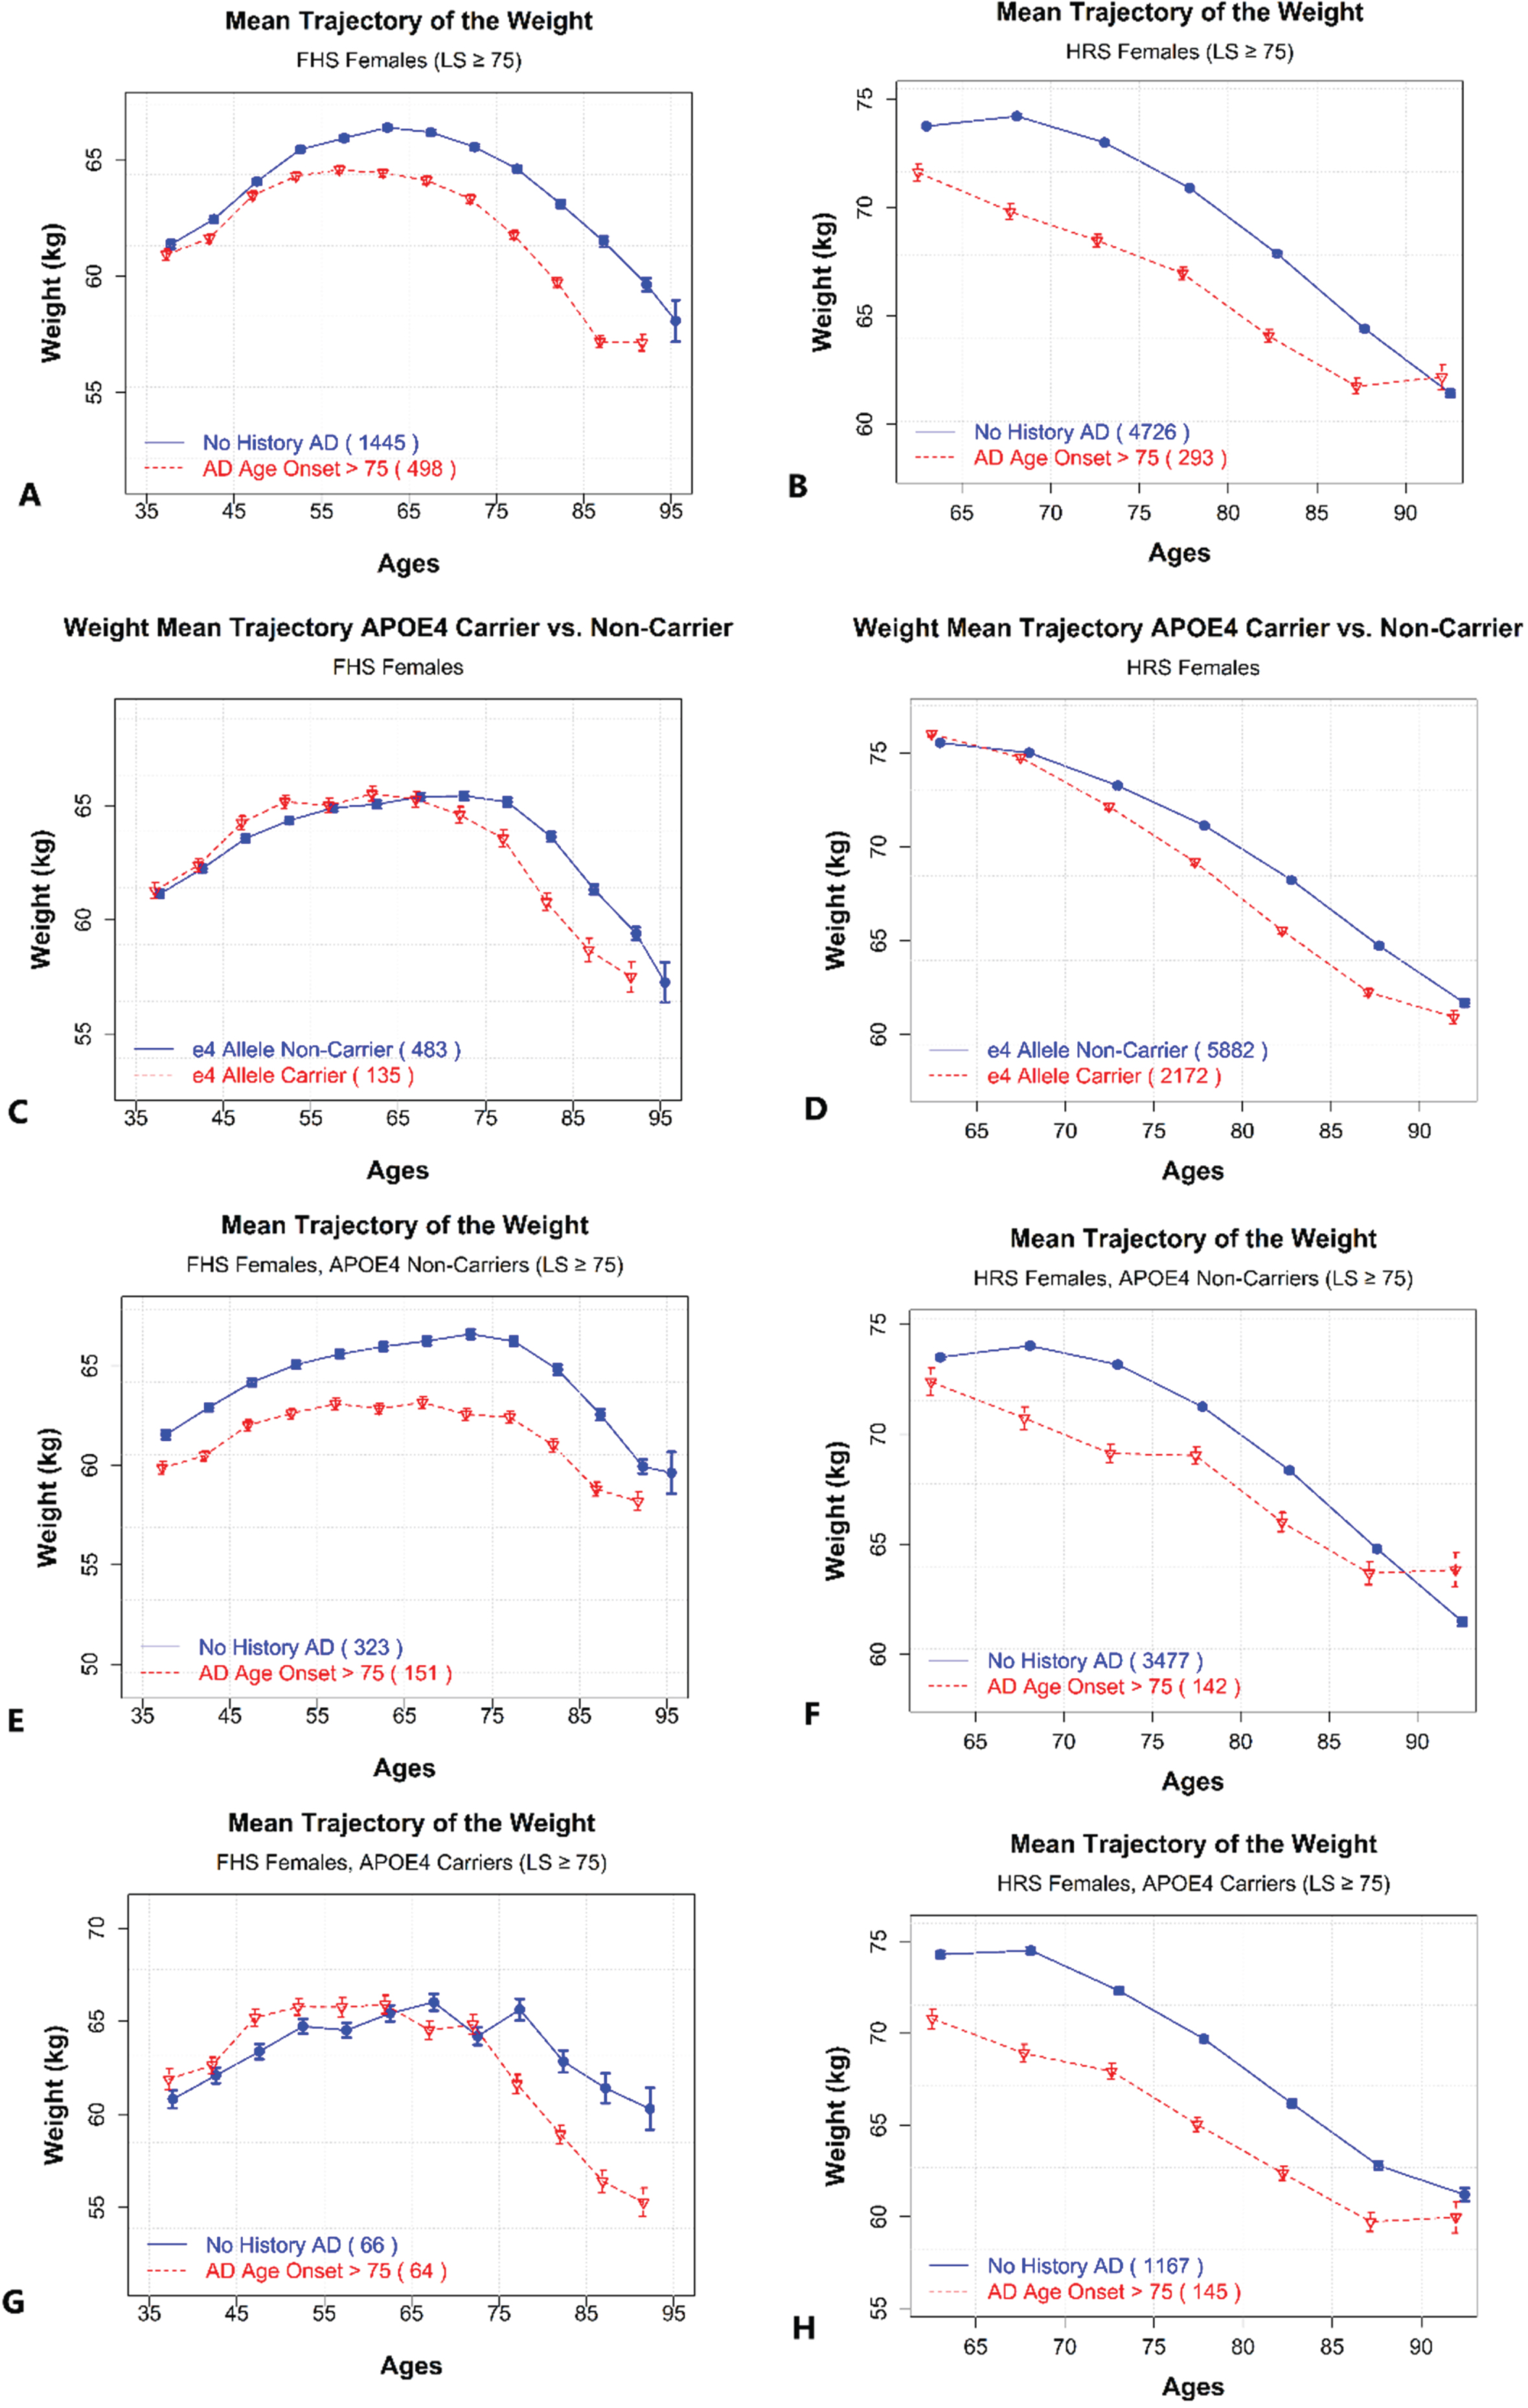 Mean age-trajectories of weight for women with and without history of AD, and by APOE4 carrier status. A) Age-patterns of weight for females with and without AD history. Dashed line – females with AD onset at ages 75+. Solid line - females without AD and with lifespan (LS) 75 years or older. FHS. B) Age-patterns of weight for females with and without AD history. Dashed line – females with AD onset at ages 75+. Solid line - females without AD and with lifespan (LS) 75 years or older. HRS. C) Age-patterns of weight for females with and without APOE ɛ4 allele. Dashed line – females, who are ɛ4 allele carriers. Solid line - females, who are ɛ4 allele non-carriers. FHS. D) Age-patterns of weight for females with and without APOE ɛ4 allele. Dashed line – females, who are ɛ4 allele carriers. Solid line - females, who are ɛ4 allele non-carriers. HRS. E) Age-patterns of weight for females without APOE ɛ4 allele, by AD history. Dashed line – females with AD onset at ages 75+. Solid line - females without AD and with lifespan (LS) 75 years or older. FHS. F) Age-patterns of weight for females without APOE ɛ4 allele, by AD history. Dashed line – females with AD onset at ages 75+. Solid line - females without AD and with lifespan (LS) 75 years or older. HRS. G) Age-patterns of weight for female APOE ɛ4 allele carriers, by AD history. Dashed line – females with AD onset at ages 75+. Solid line - females without AD and with lifespan (LS) 75 years or older. FHS. H) Age-patterns of weight for female APOE ɛ4 allele carriers, by AD history. Dashed line – females with AD onset at ages 75+. Solid line - females without AD and with lifespan (LS) 75 years or older. HRS.